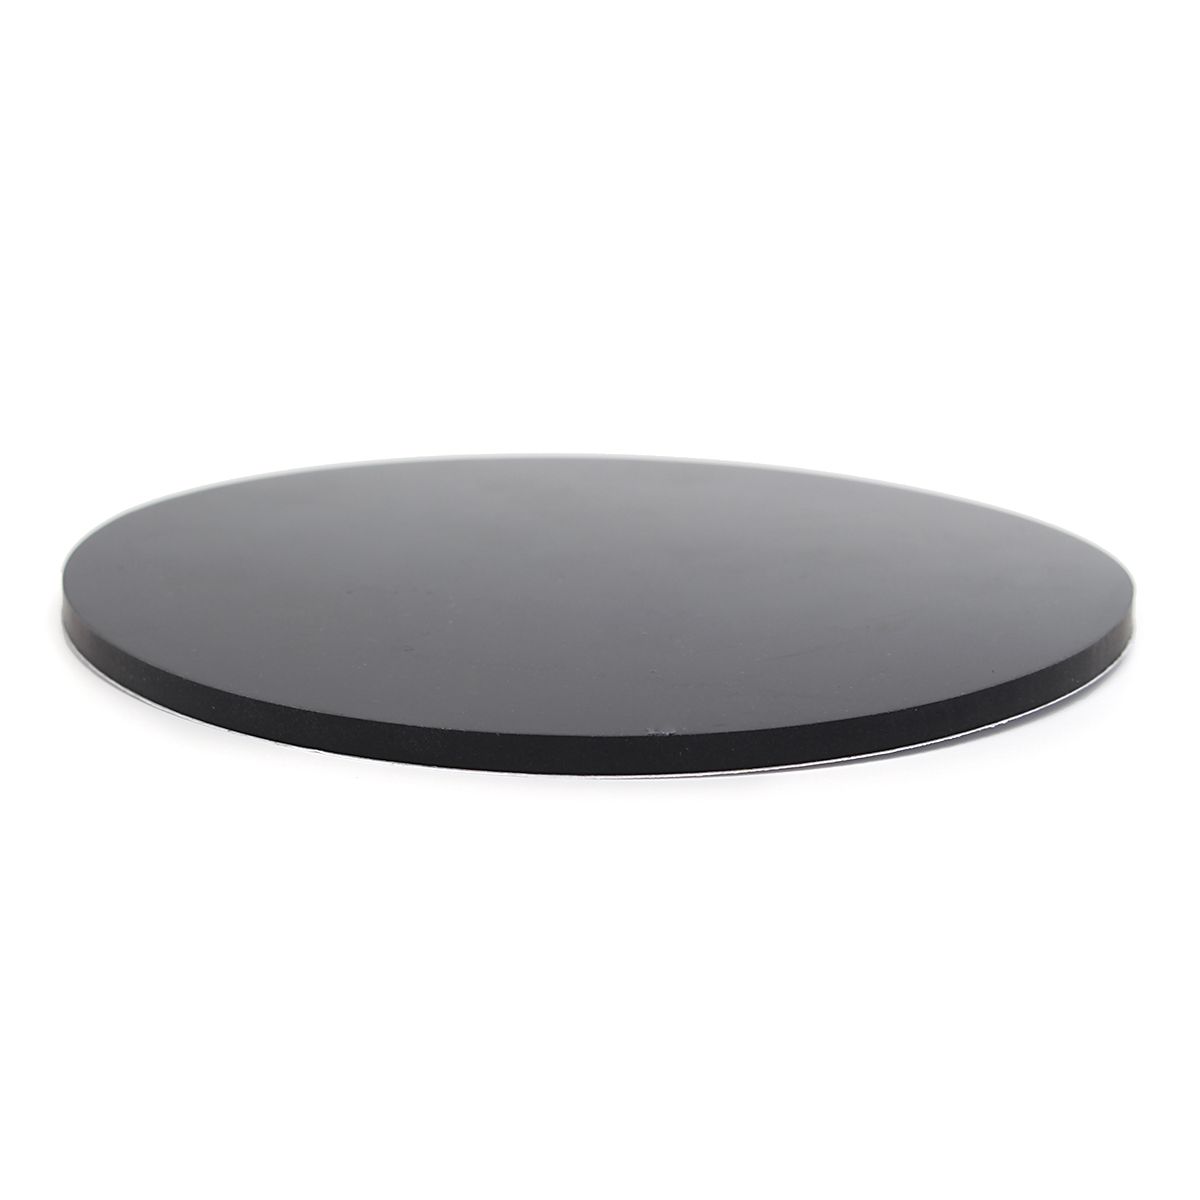 3Pcs-120mm-Round-Black-Silicone-Oval-Model-Bases-Support-for-Wargames-Table-Games-1268421